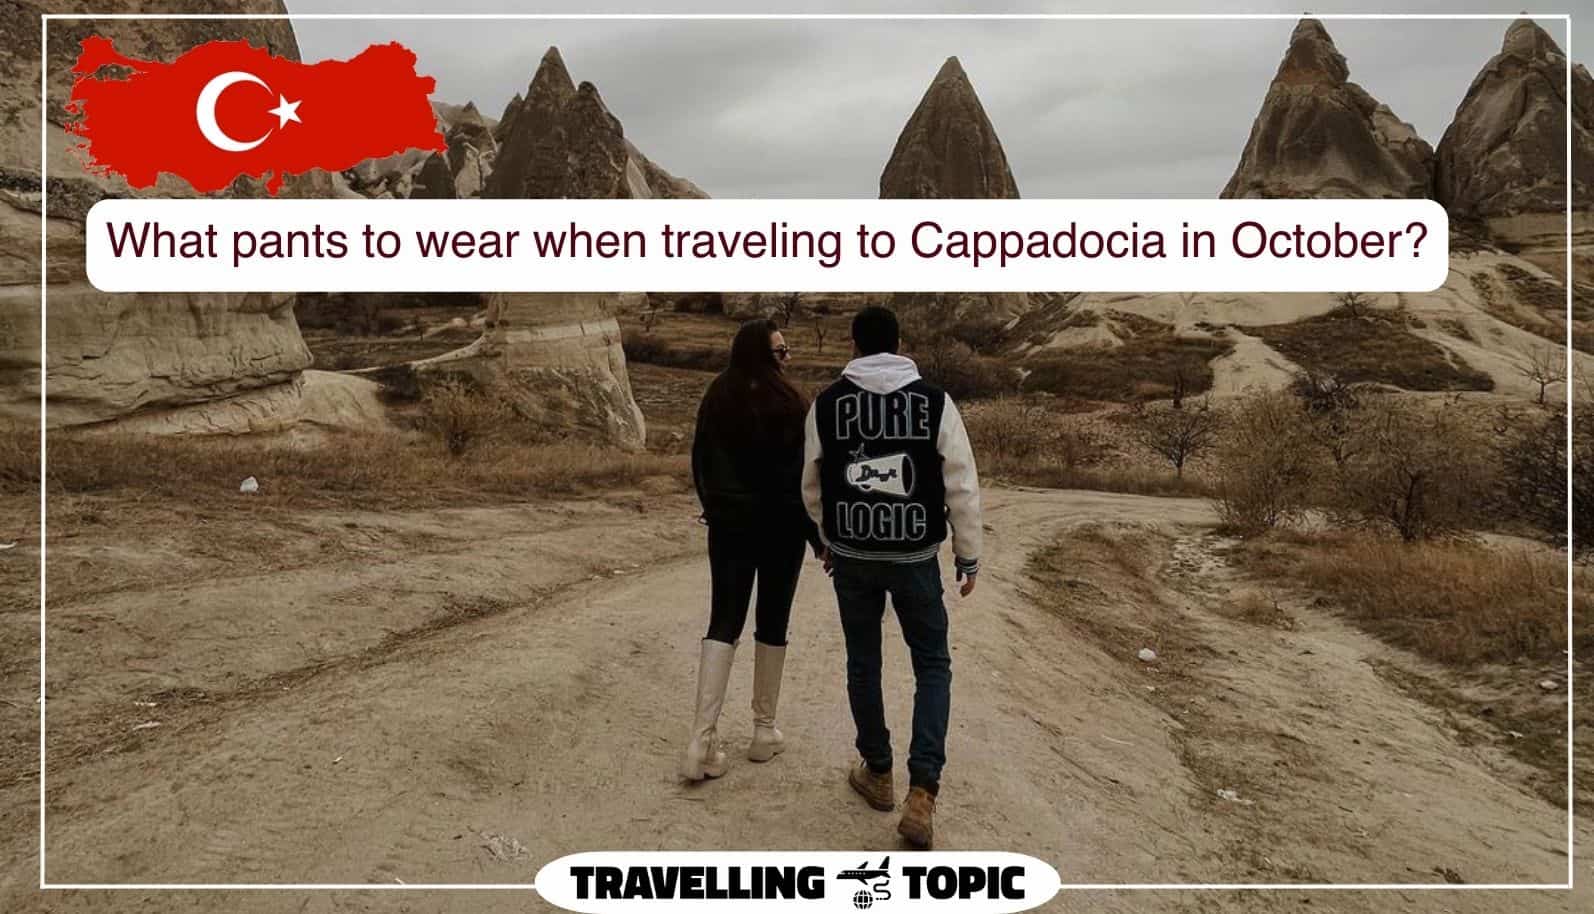 What pants to wear when traveling to Cappadocia in October